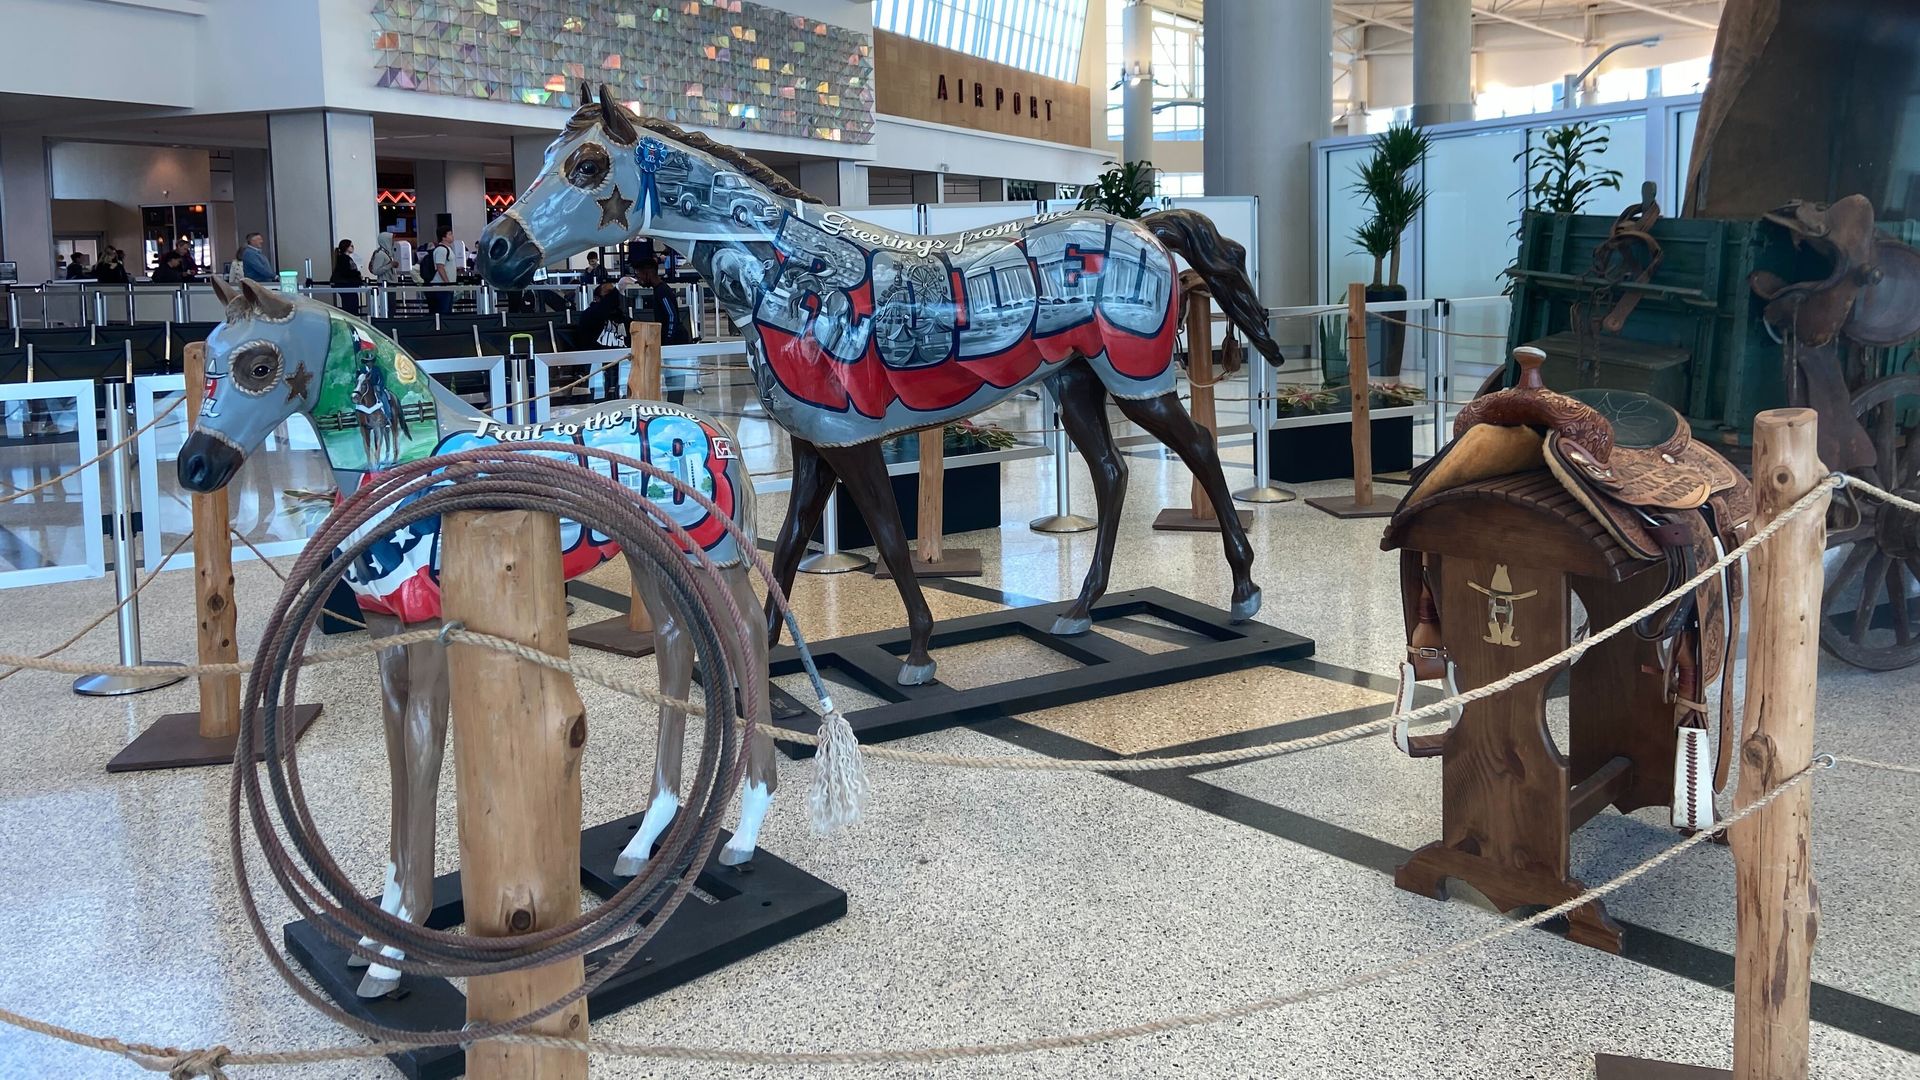 Artwork installation at Houston's Hobby Airport depicting horses, saddles and ropes dedicated to the Houston Livestock Show and Rodeo 